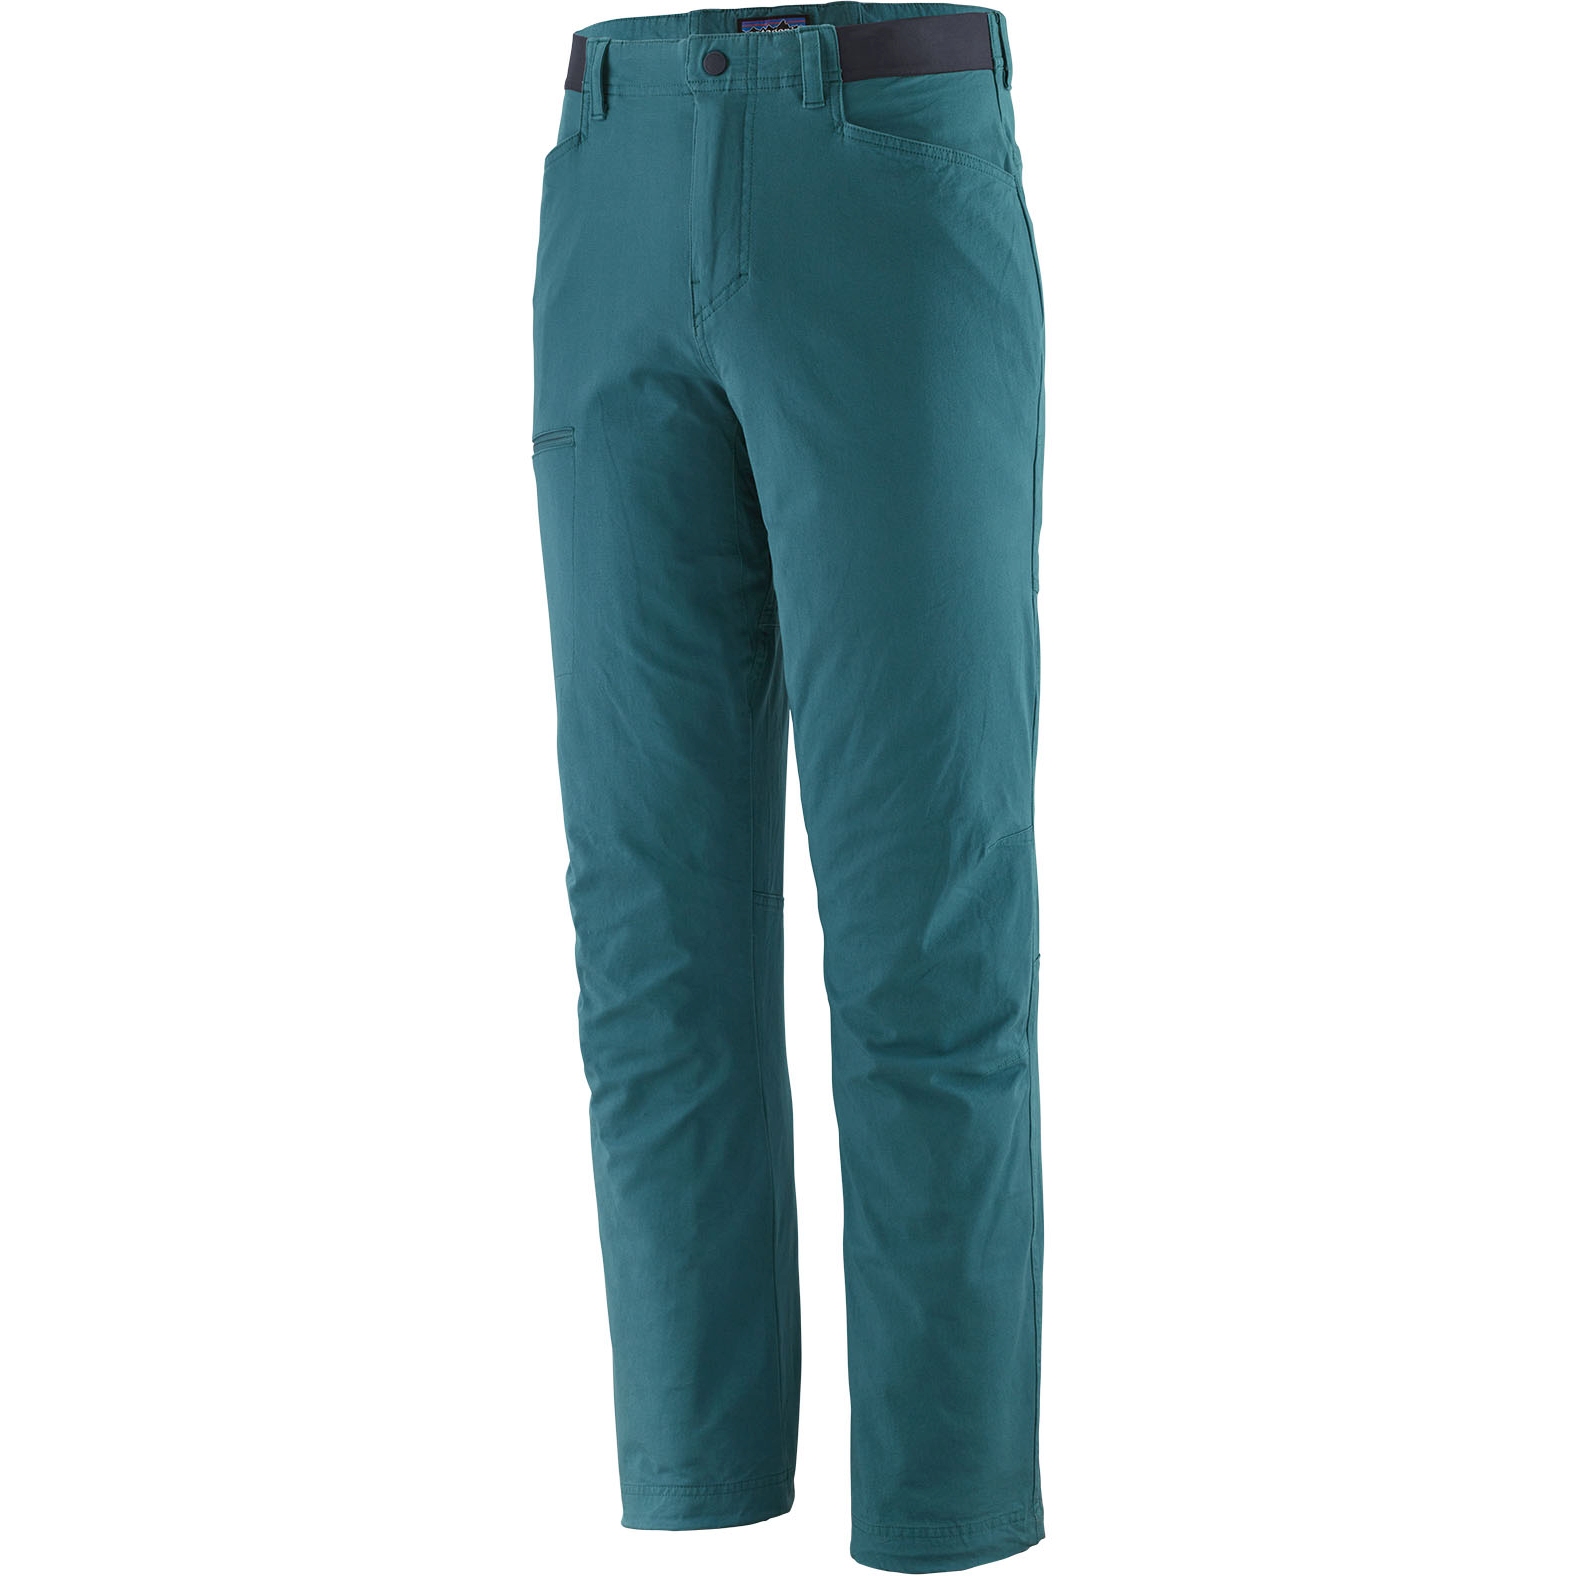 Picture of Patagonia Venga Rock Pants - Abalone Blue